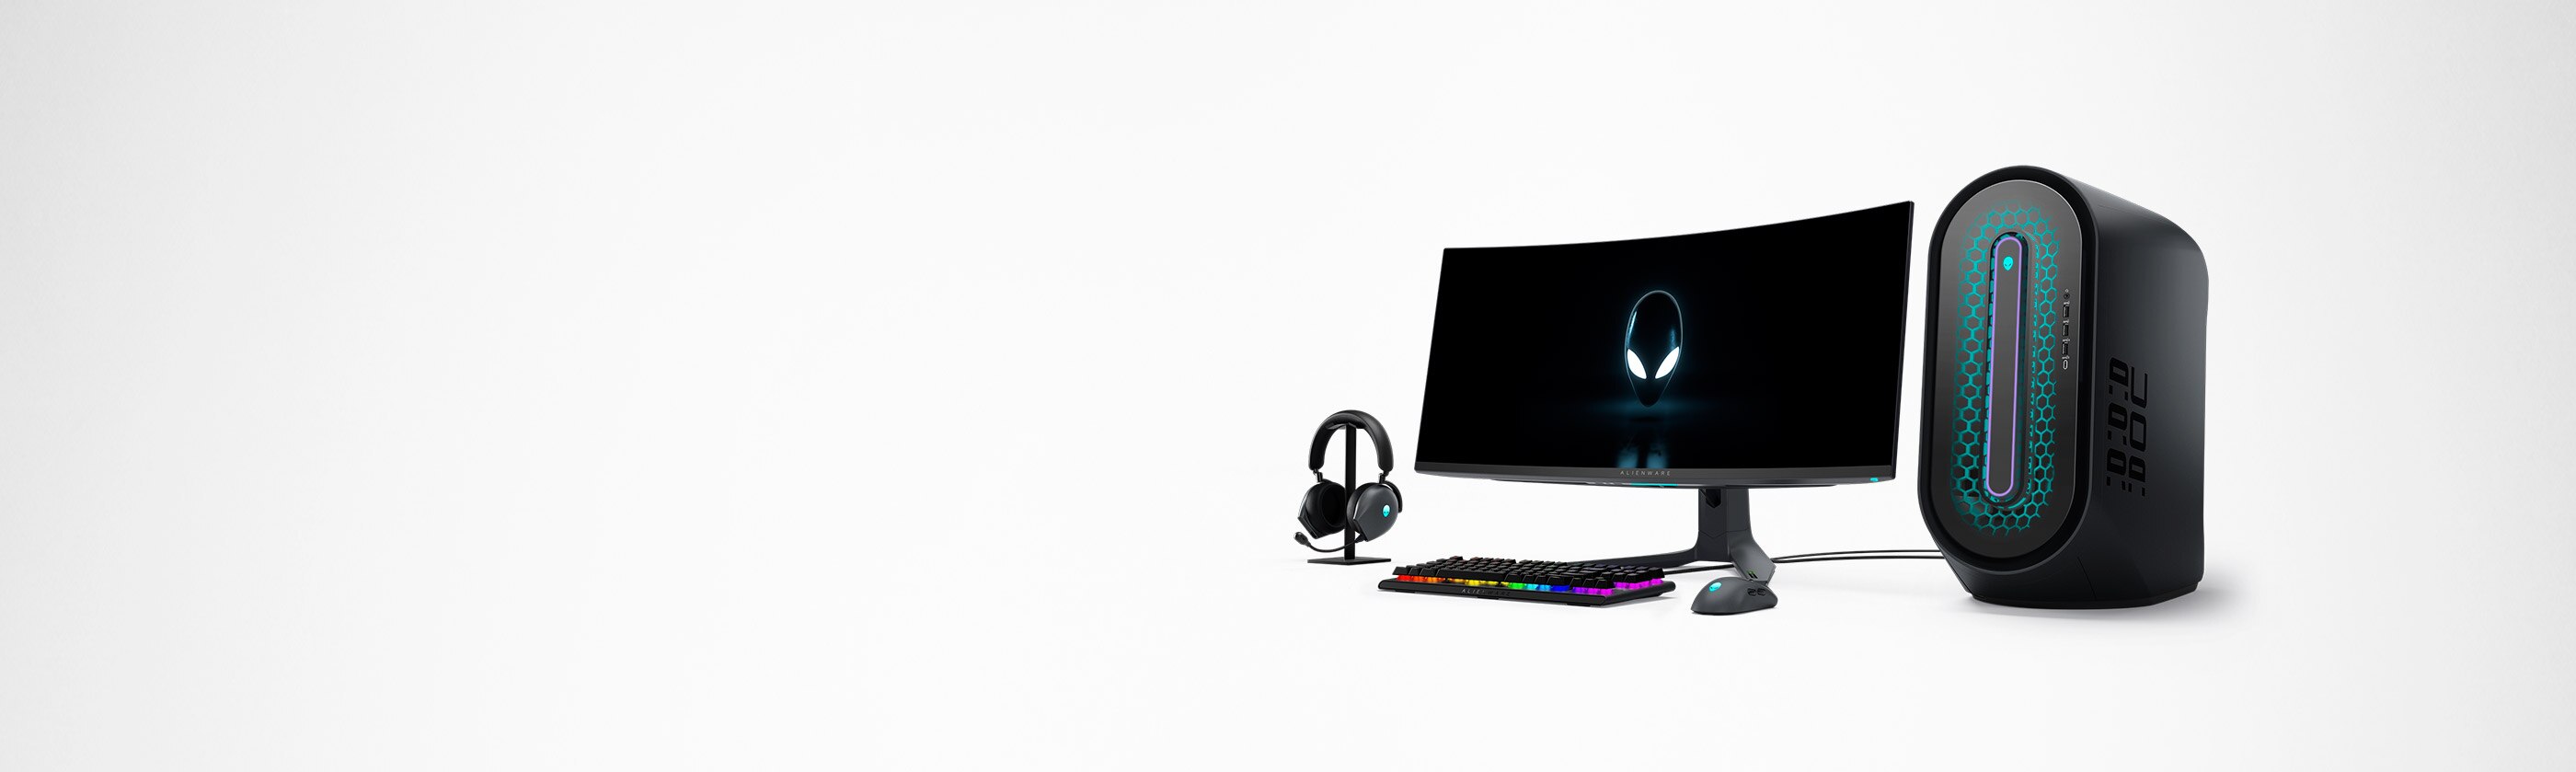 Elevate your battlestation with up to $475 off Alienware